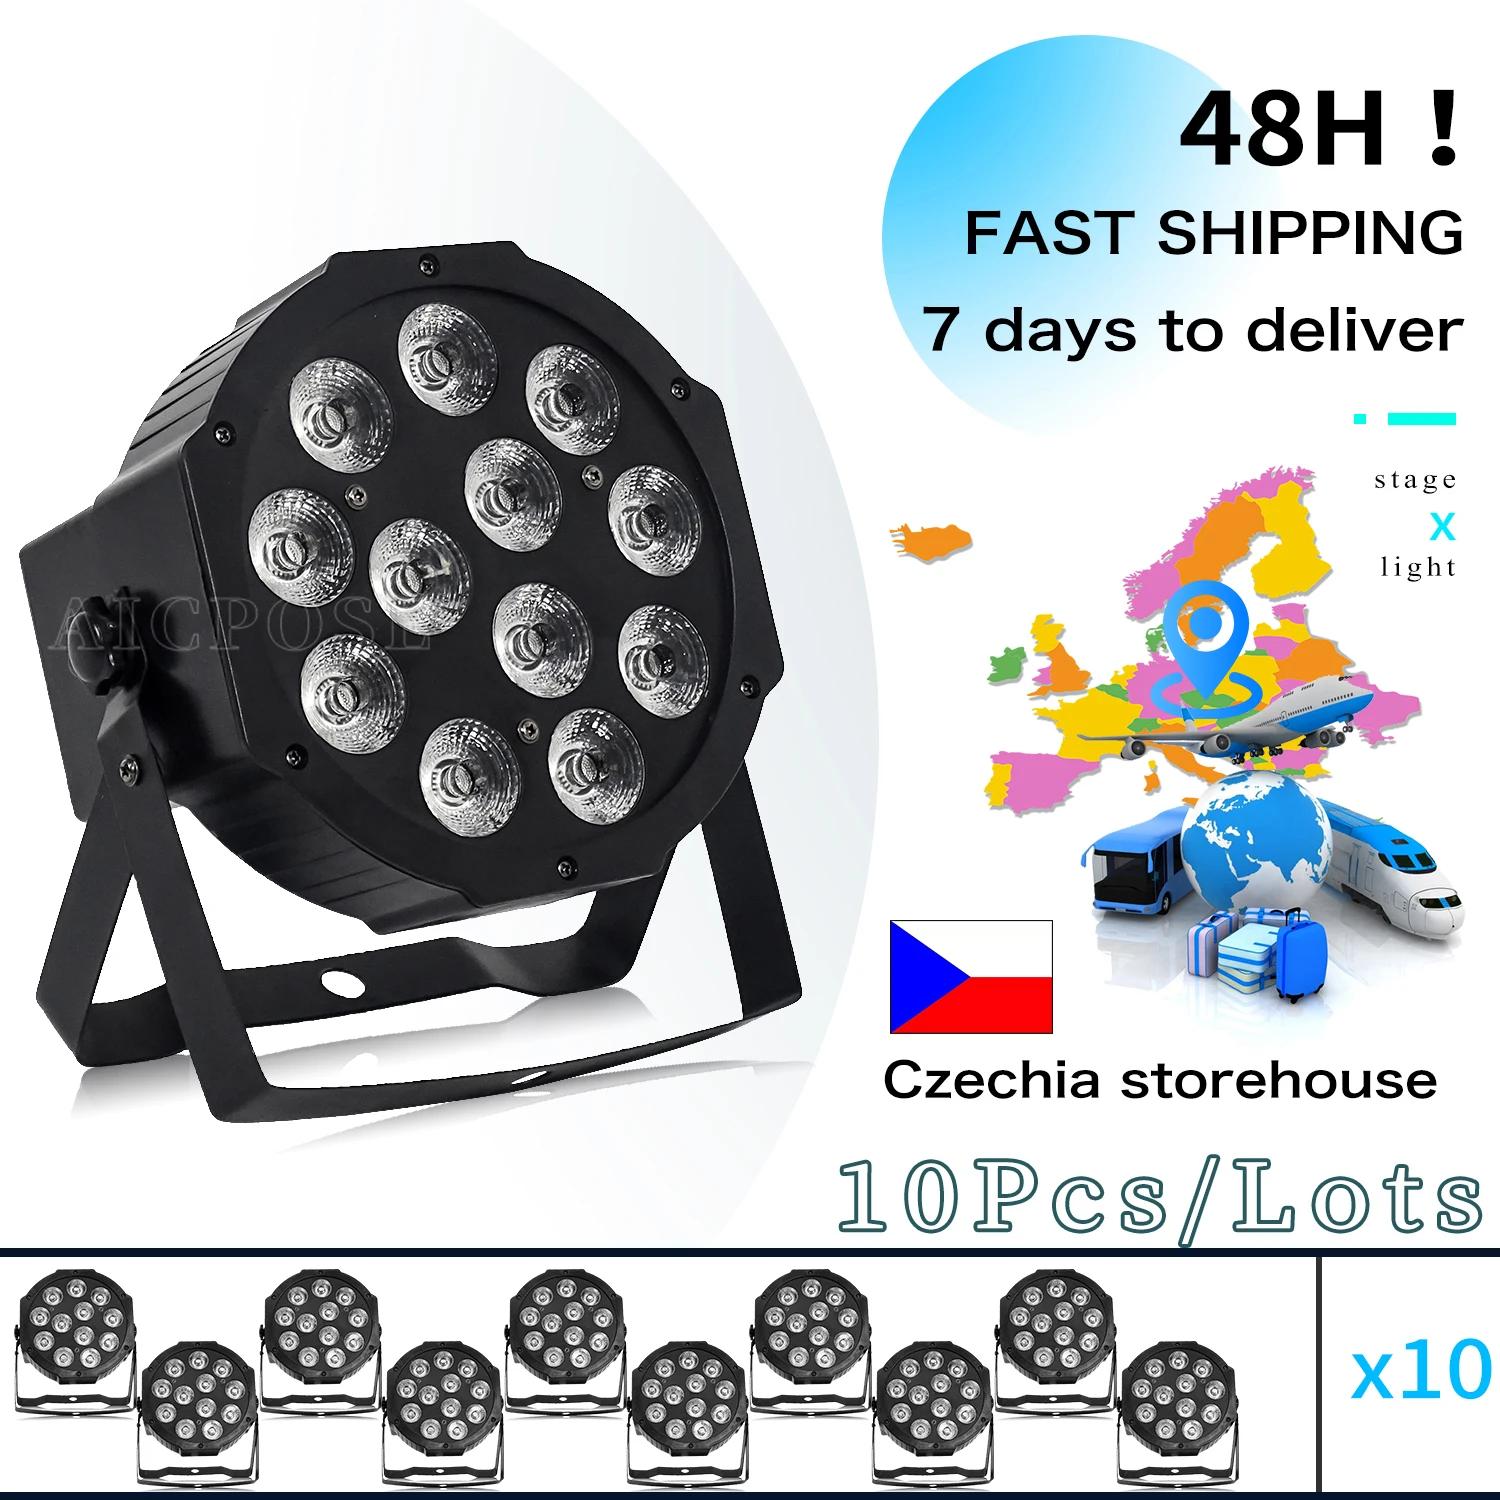 

10Pcs/Lots 12x12W RGBW 4 in 1 12x18W RGBWA+UV 6 in 1 LED Par Light Wireless Remote Control Stage Light for DJ Disco Party